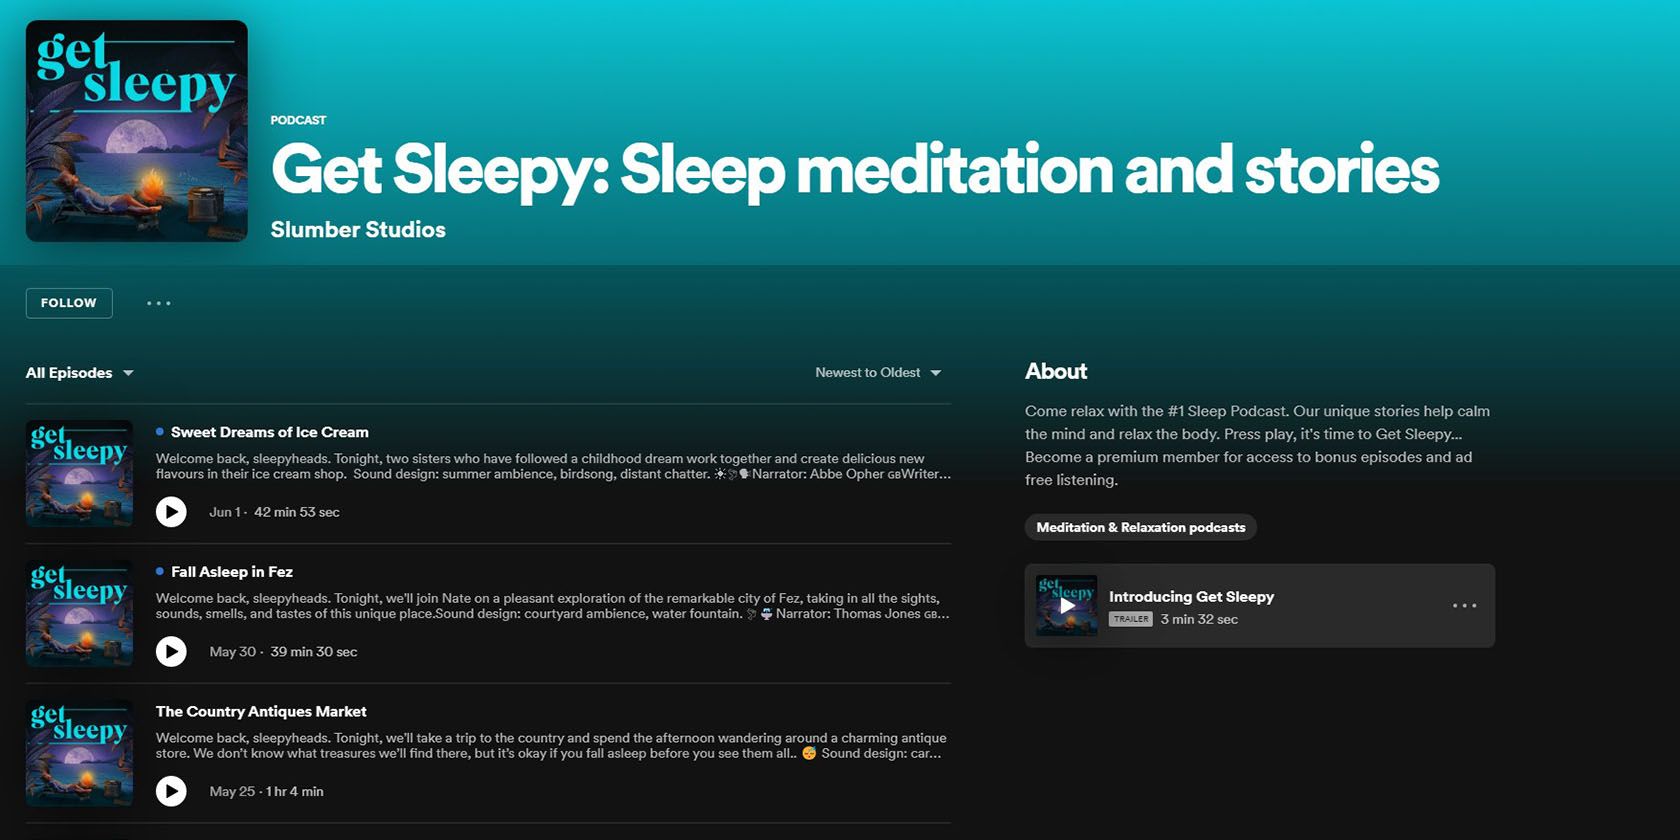 Get Sleepy podcast from Spotify